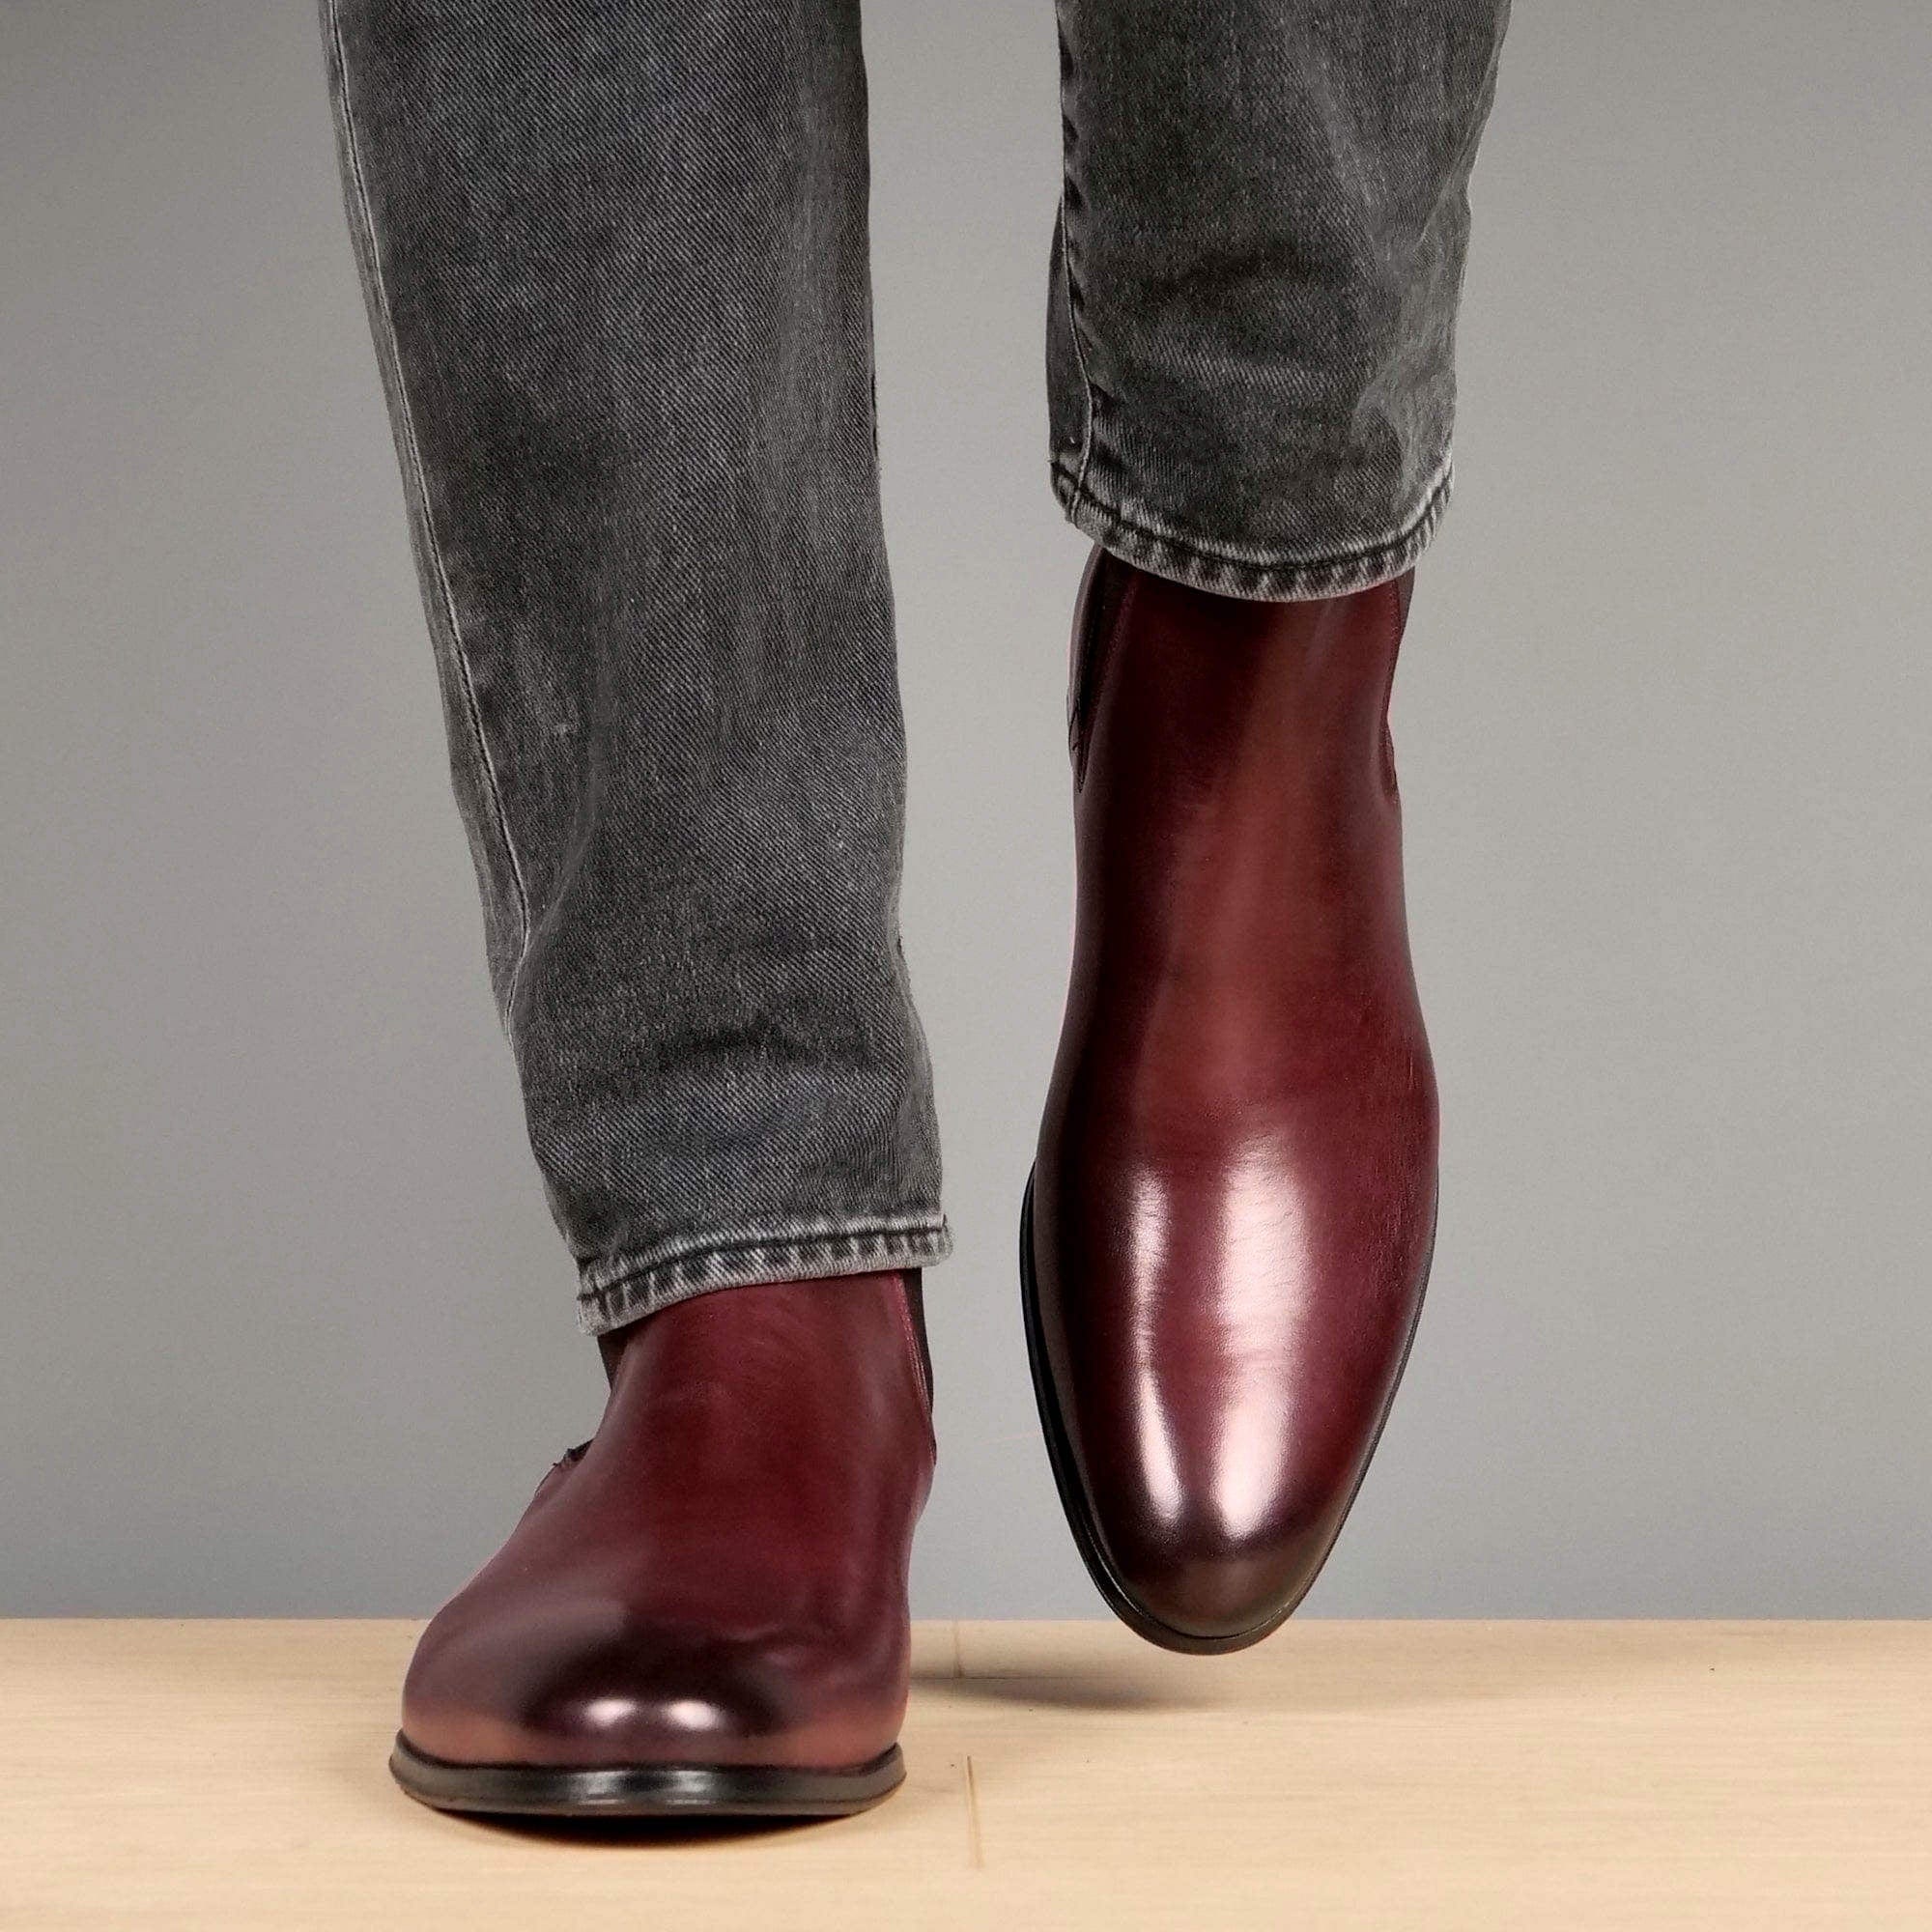 A Quick Guide To Choosing the Perfect Pair Of Men's Chelsea Boots